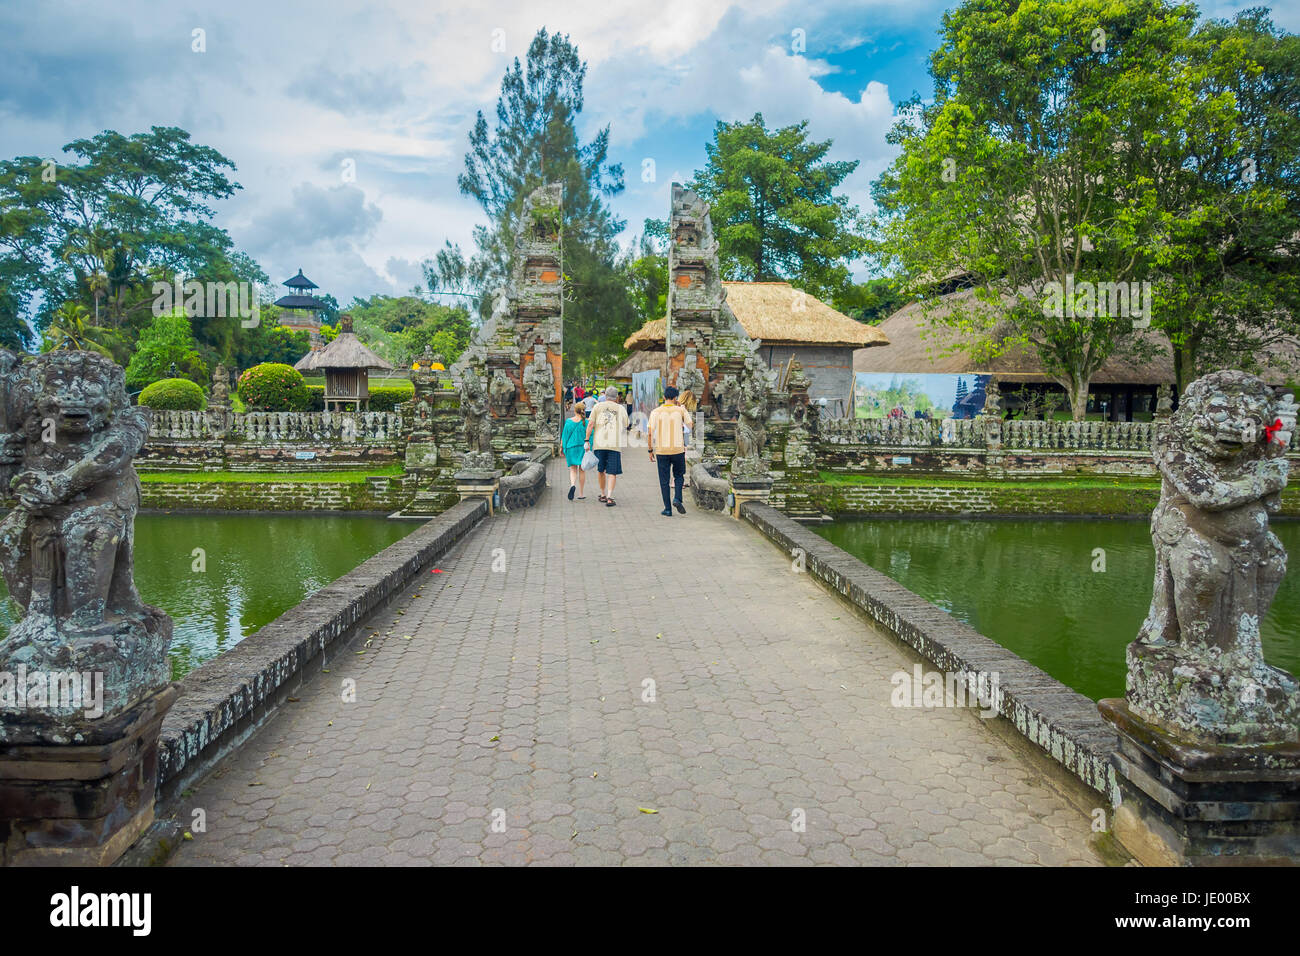 People walking inside of the temple of Mengwi Empire located in Mengwi, Badung regency that is famous places of interest in Bali, Indonesia. Stock Photo